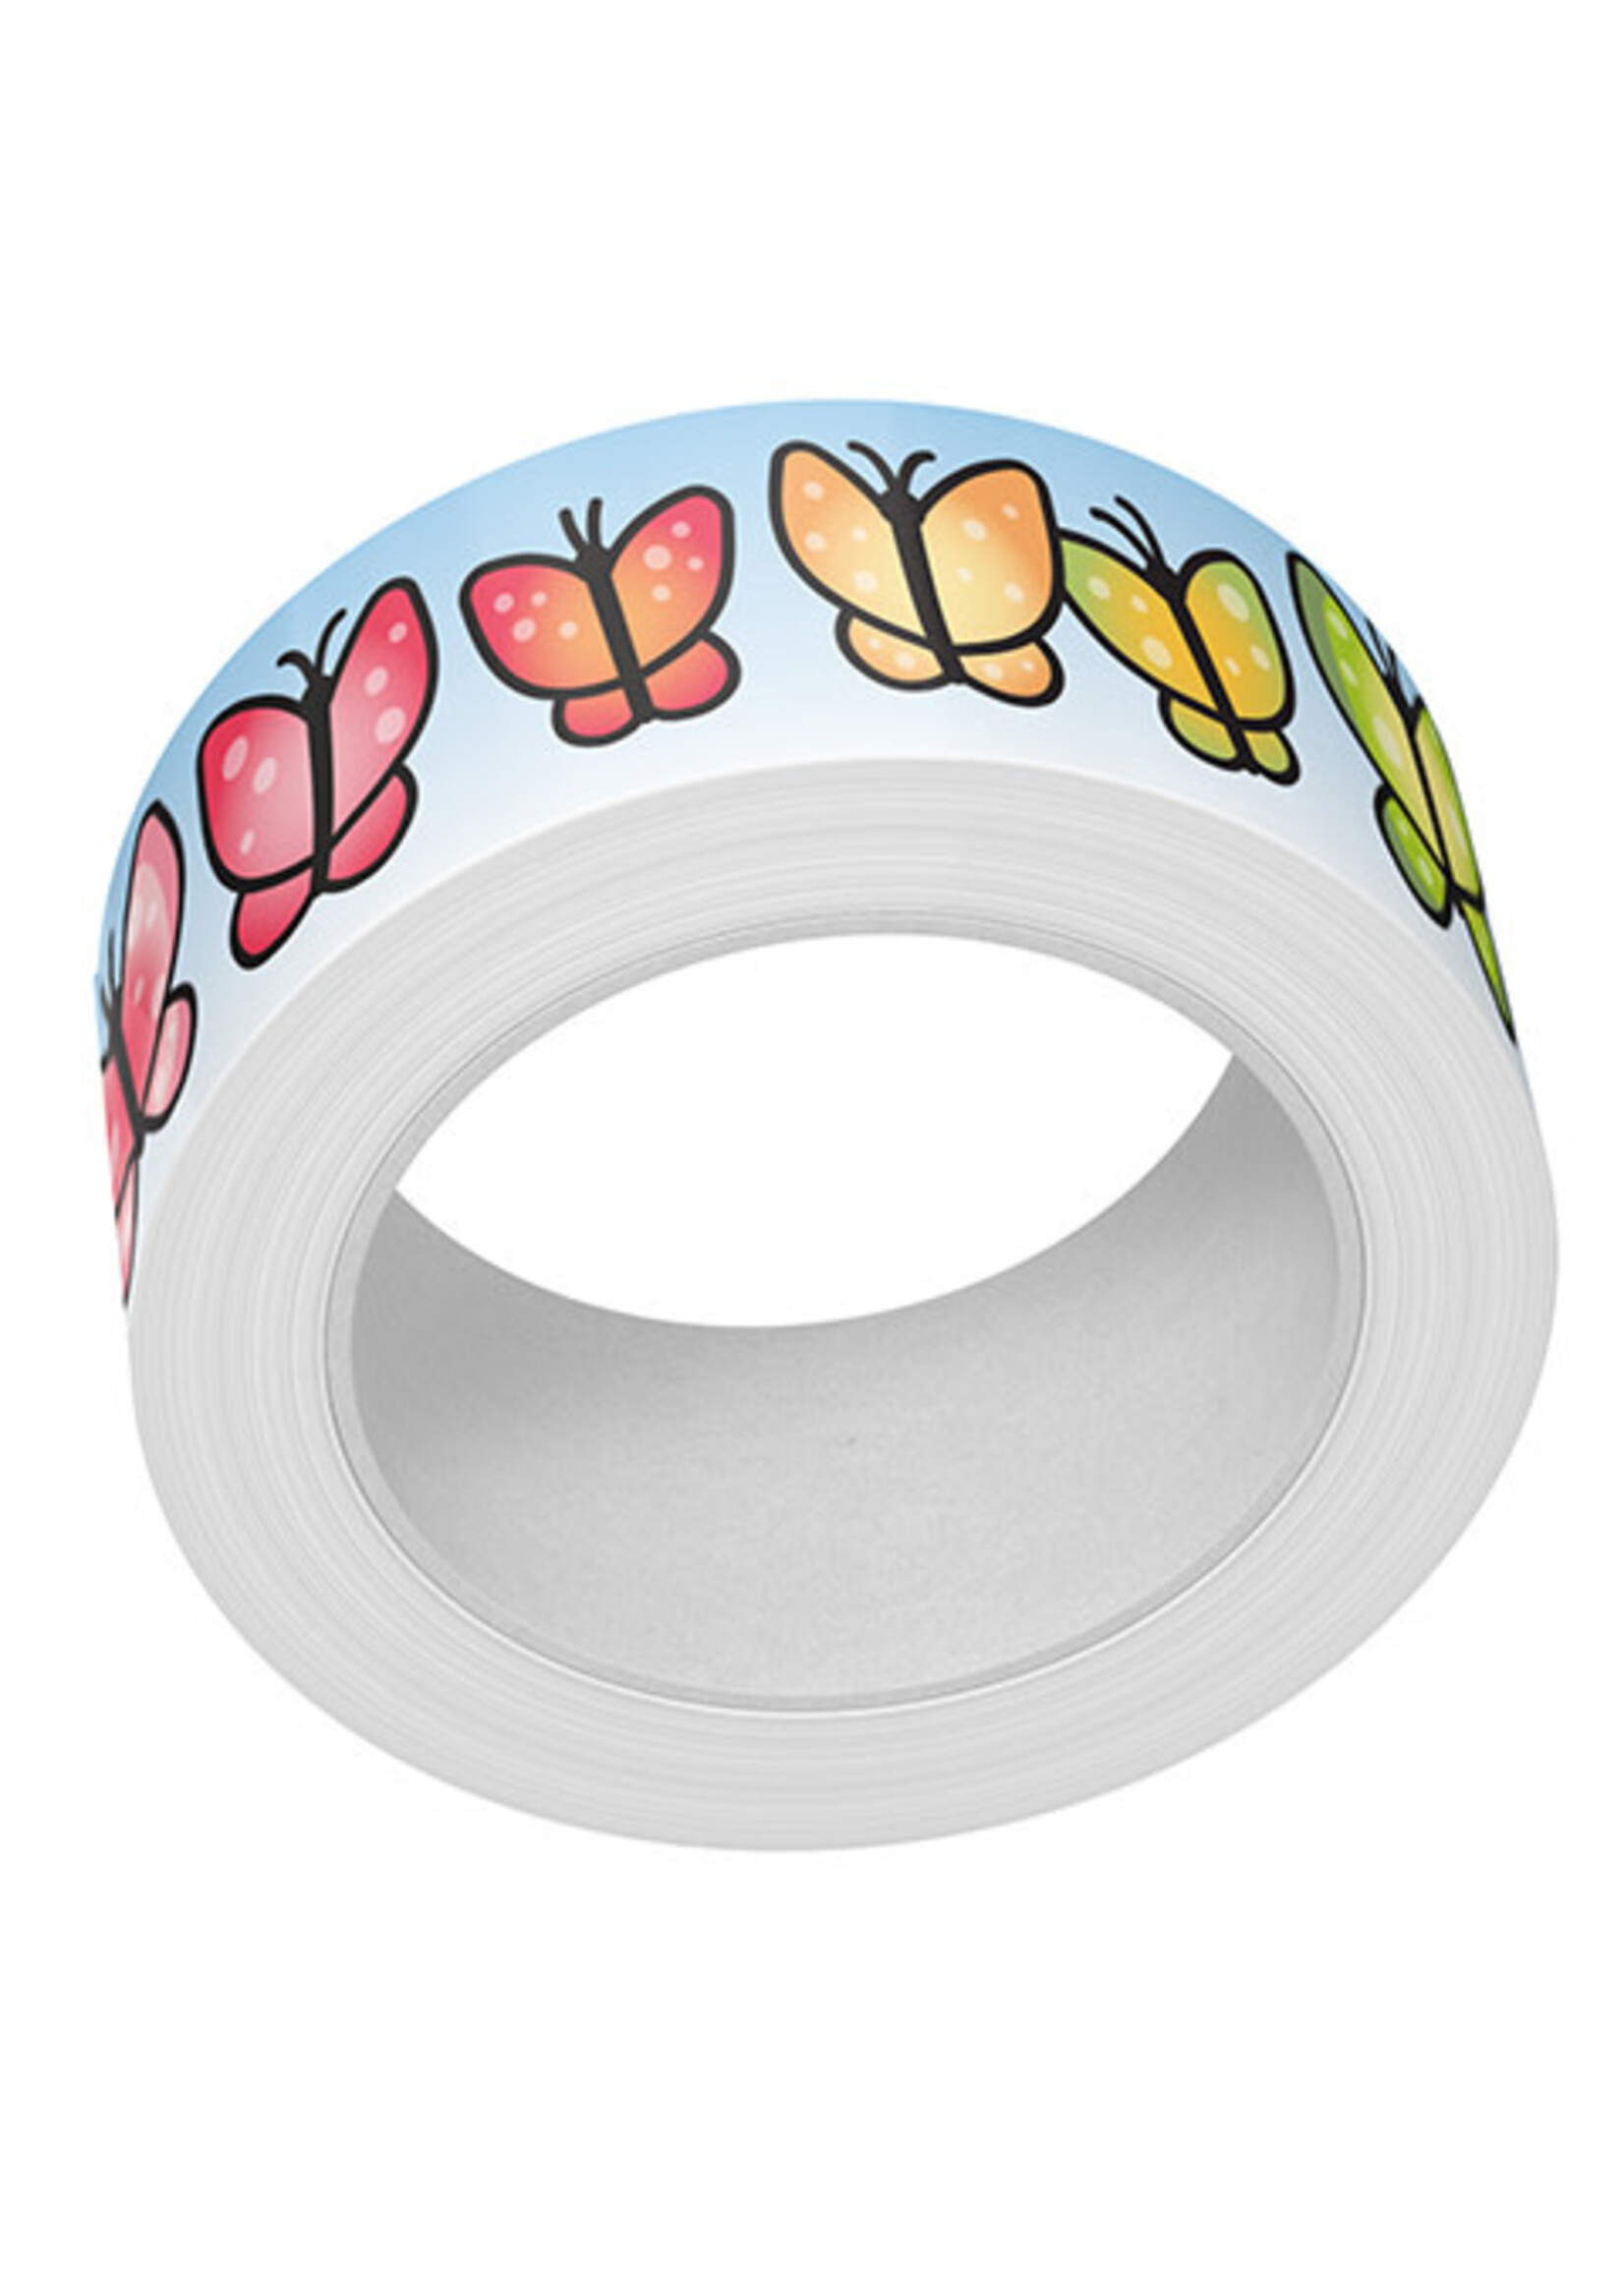 Lawn Fawn butterfly kisses washi tape